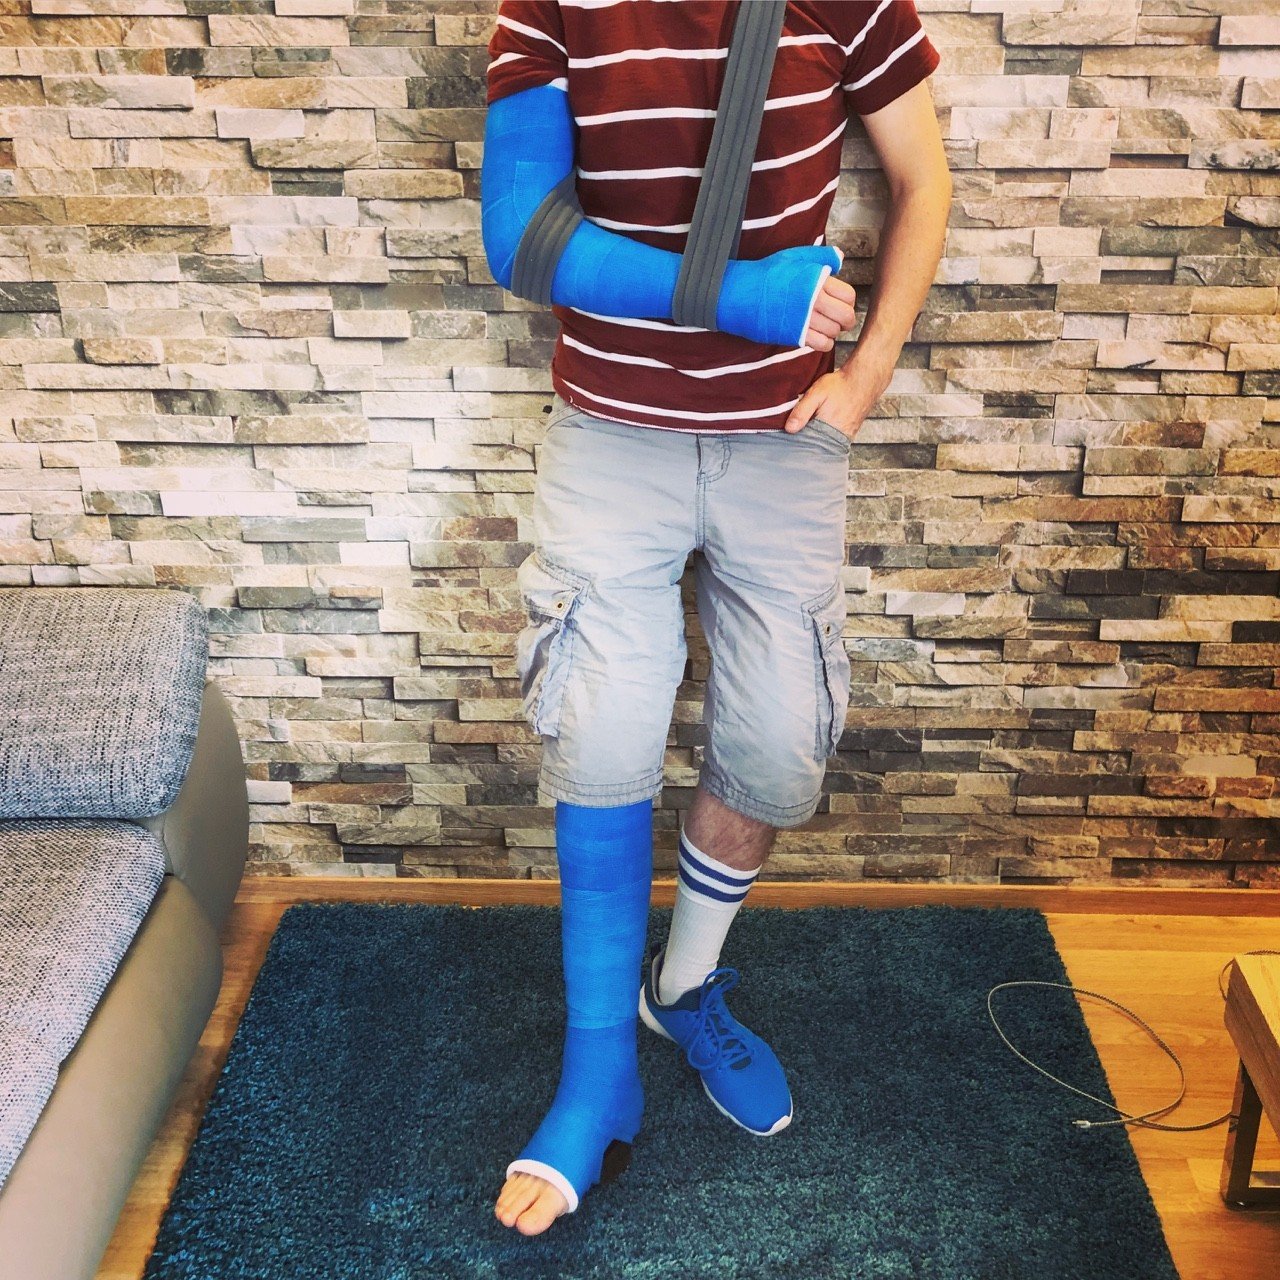 Photo by ampstef with the username @ampstef,  June 29, 2018 at 8:47 PM and the text says 'castmande:

Ready for a walk #brokenleg #brokenfoot #brokenarm #brokenhand #chastity #gayfetish #gips #gipsarm #gipsbein #gesso #yeso #platre'